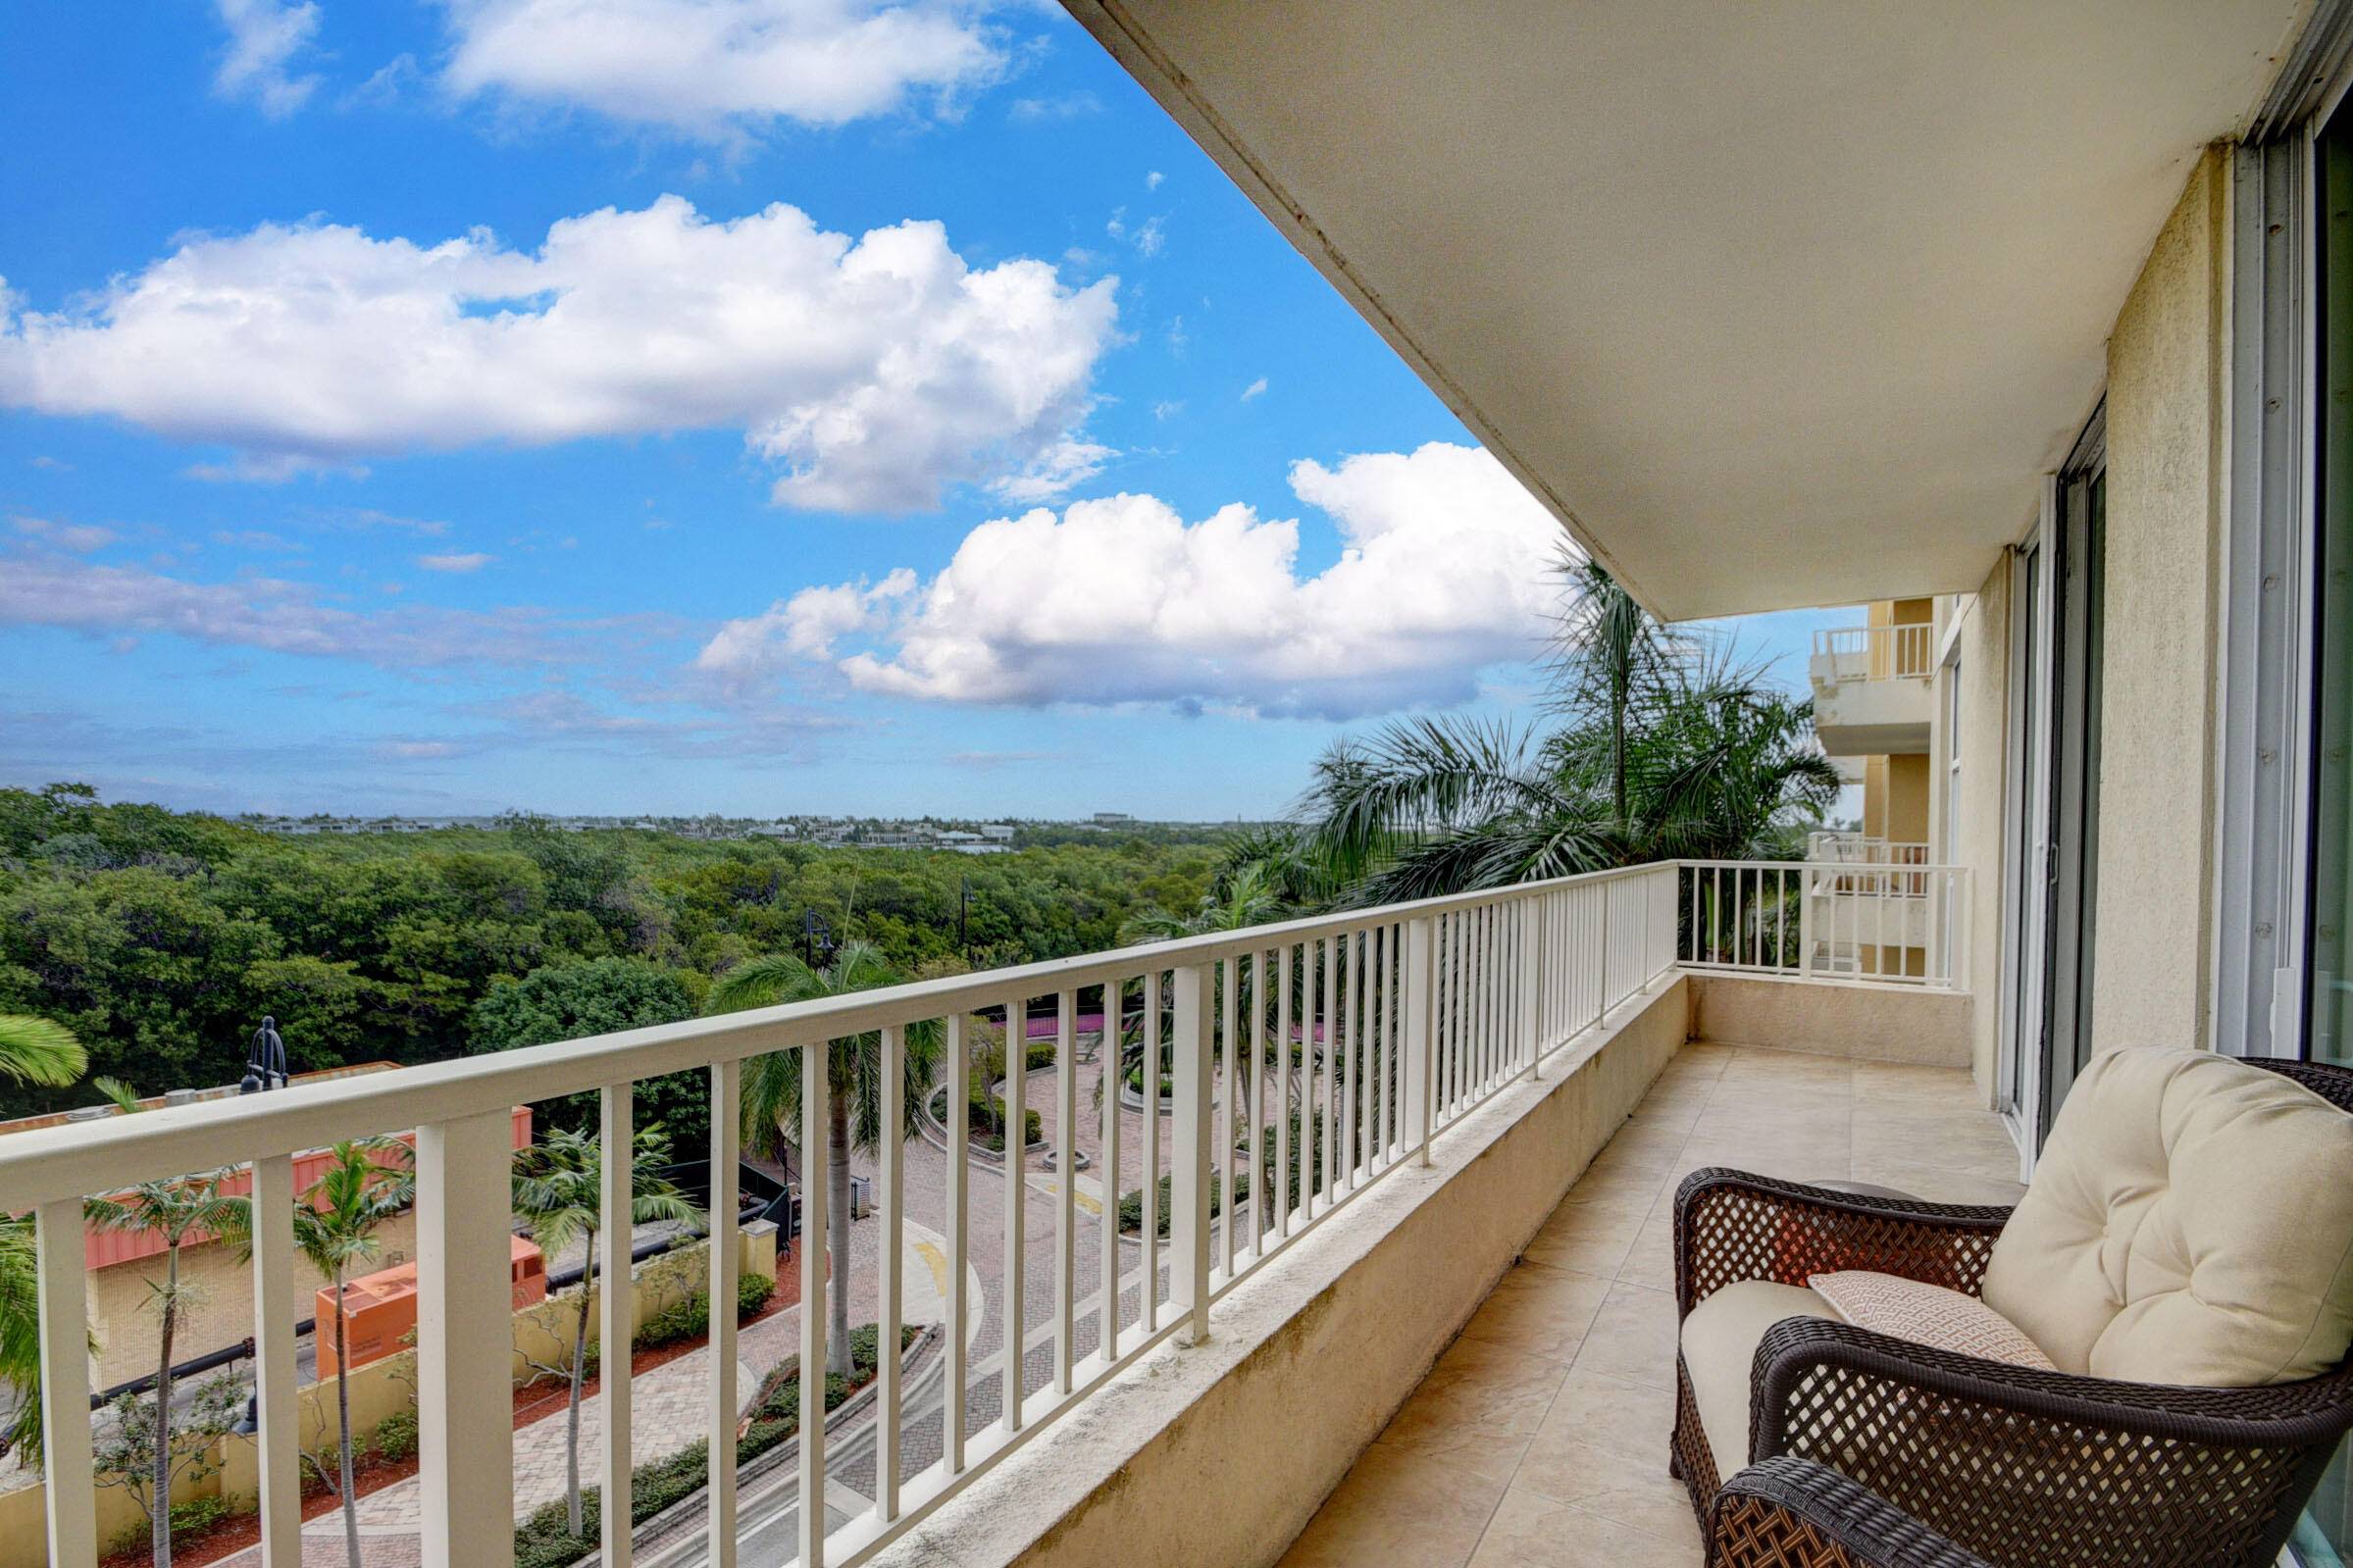 Intracoastal living, with balcony and window views of the lagoon and Intracoastal for you to enjoy.